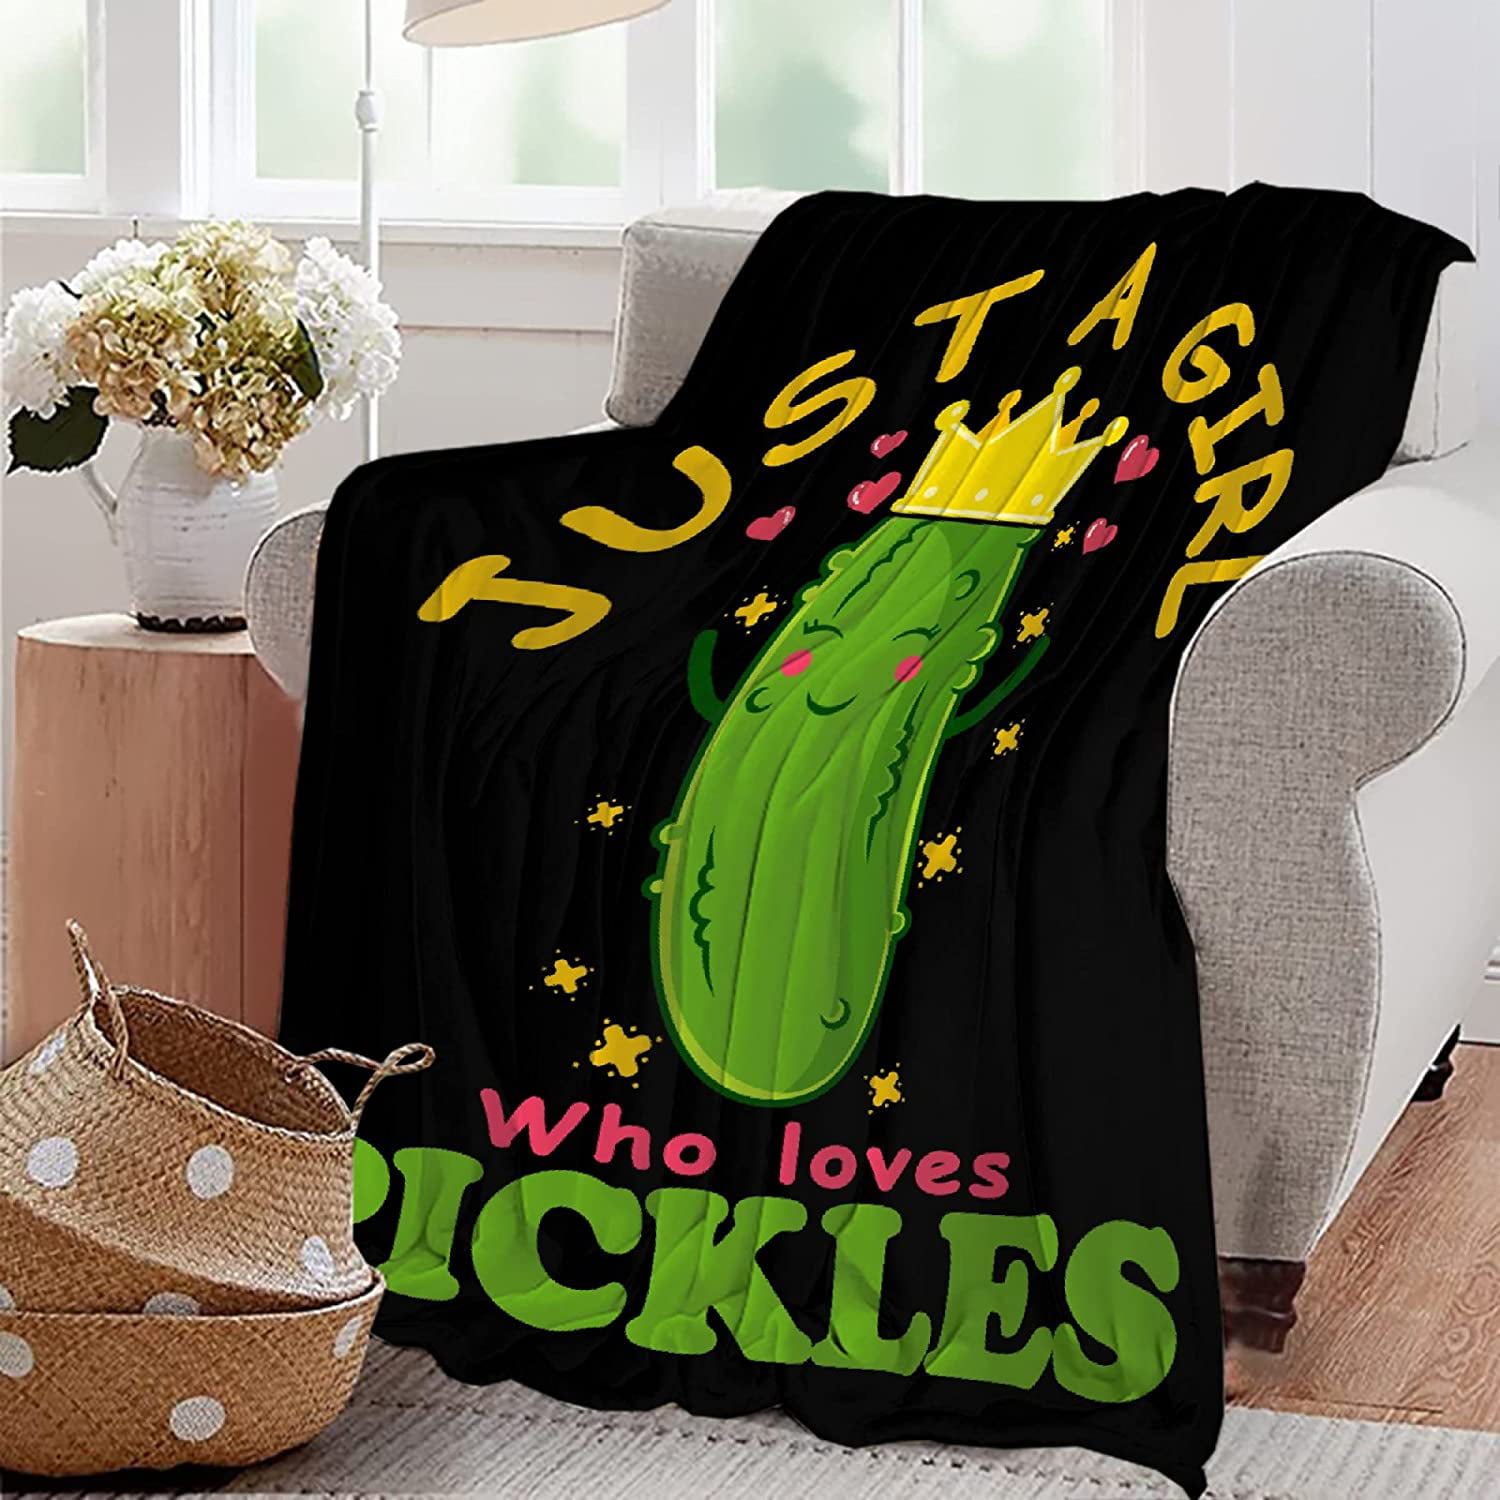 Pickles Blanket Gift for Girls Women, Just A Girl Who Loves Pickle Gifts for Pickle Lovers Cucumber Throw Blanket for Kids50x40Inch Soft Lightweight